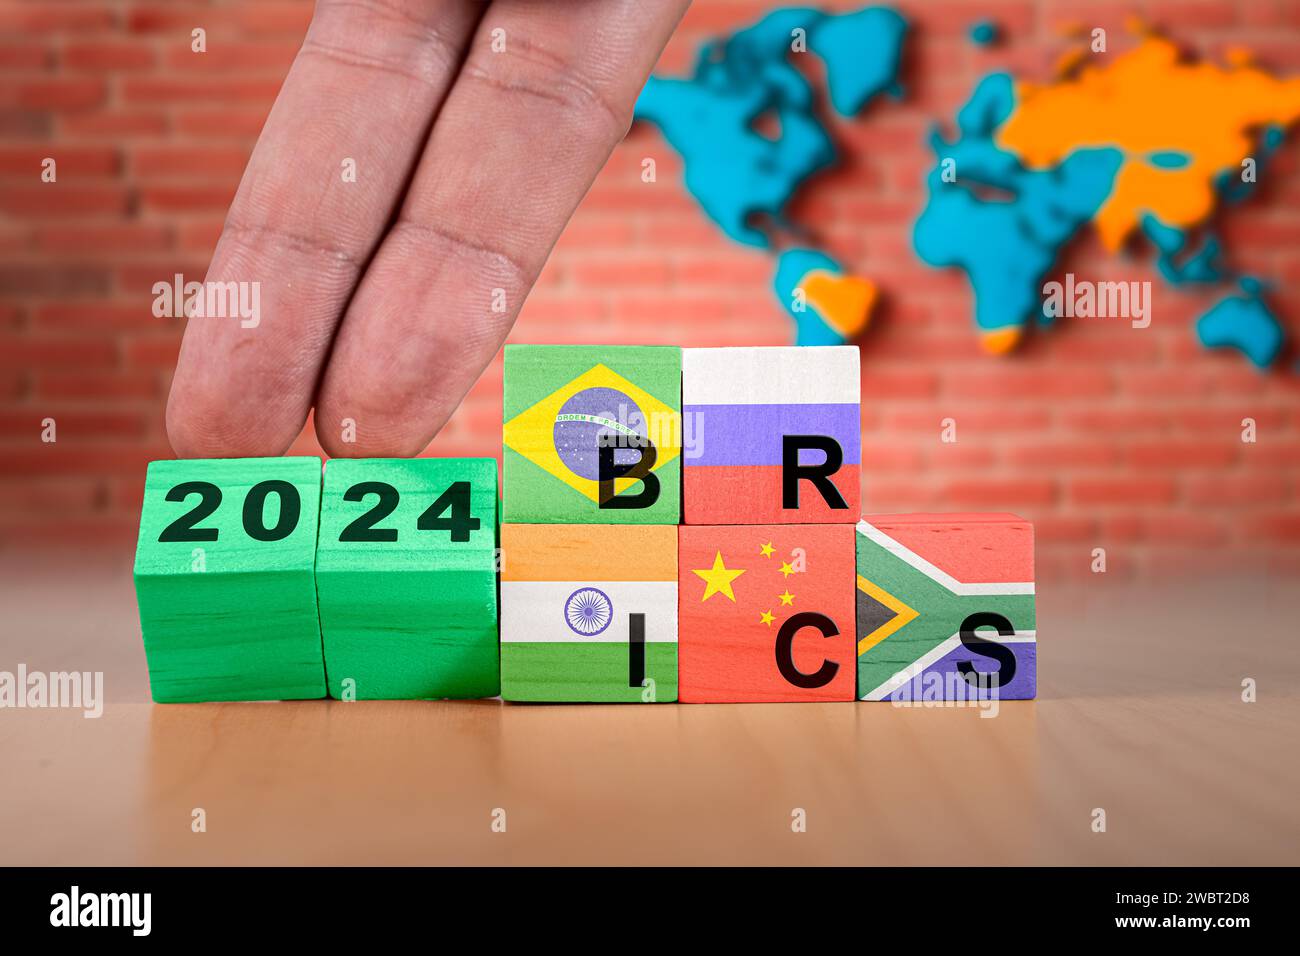 BRICS 2024 Summit in october: Uniting Nations, Building the Future Stock Photo